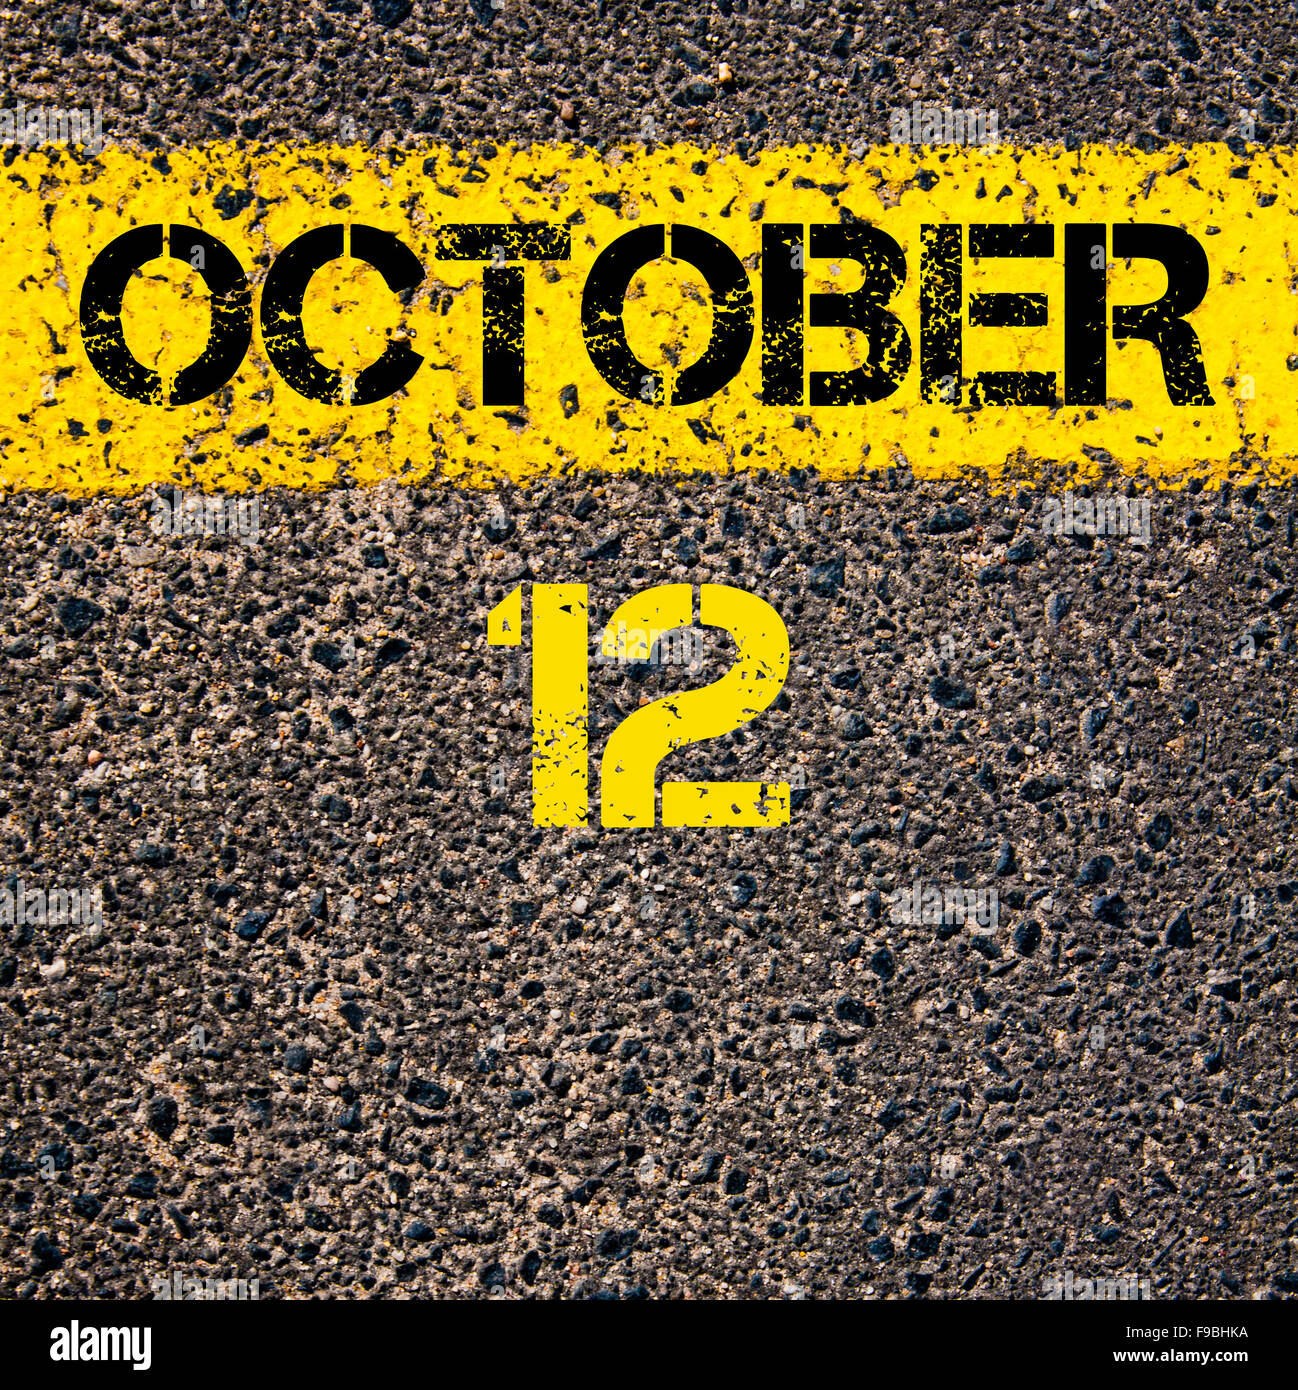 October 12nd. Day 12 of month, Calendar date. Many yellow sheet of the  calendar. Autumn month, day of the year concept Stock Photo - Alamy